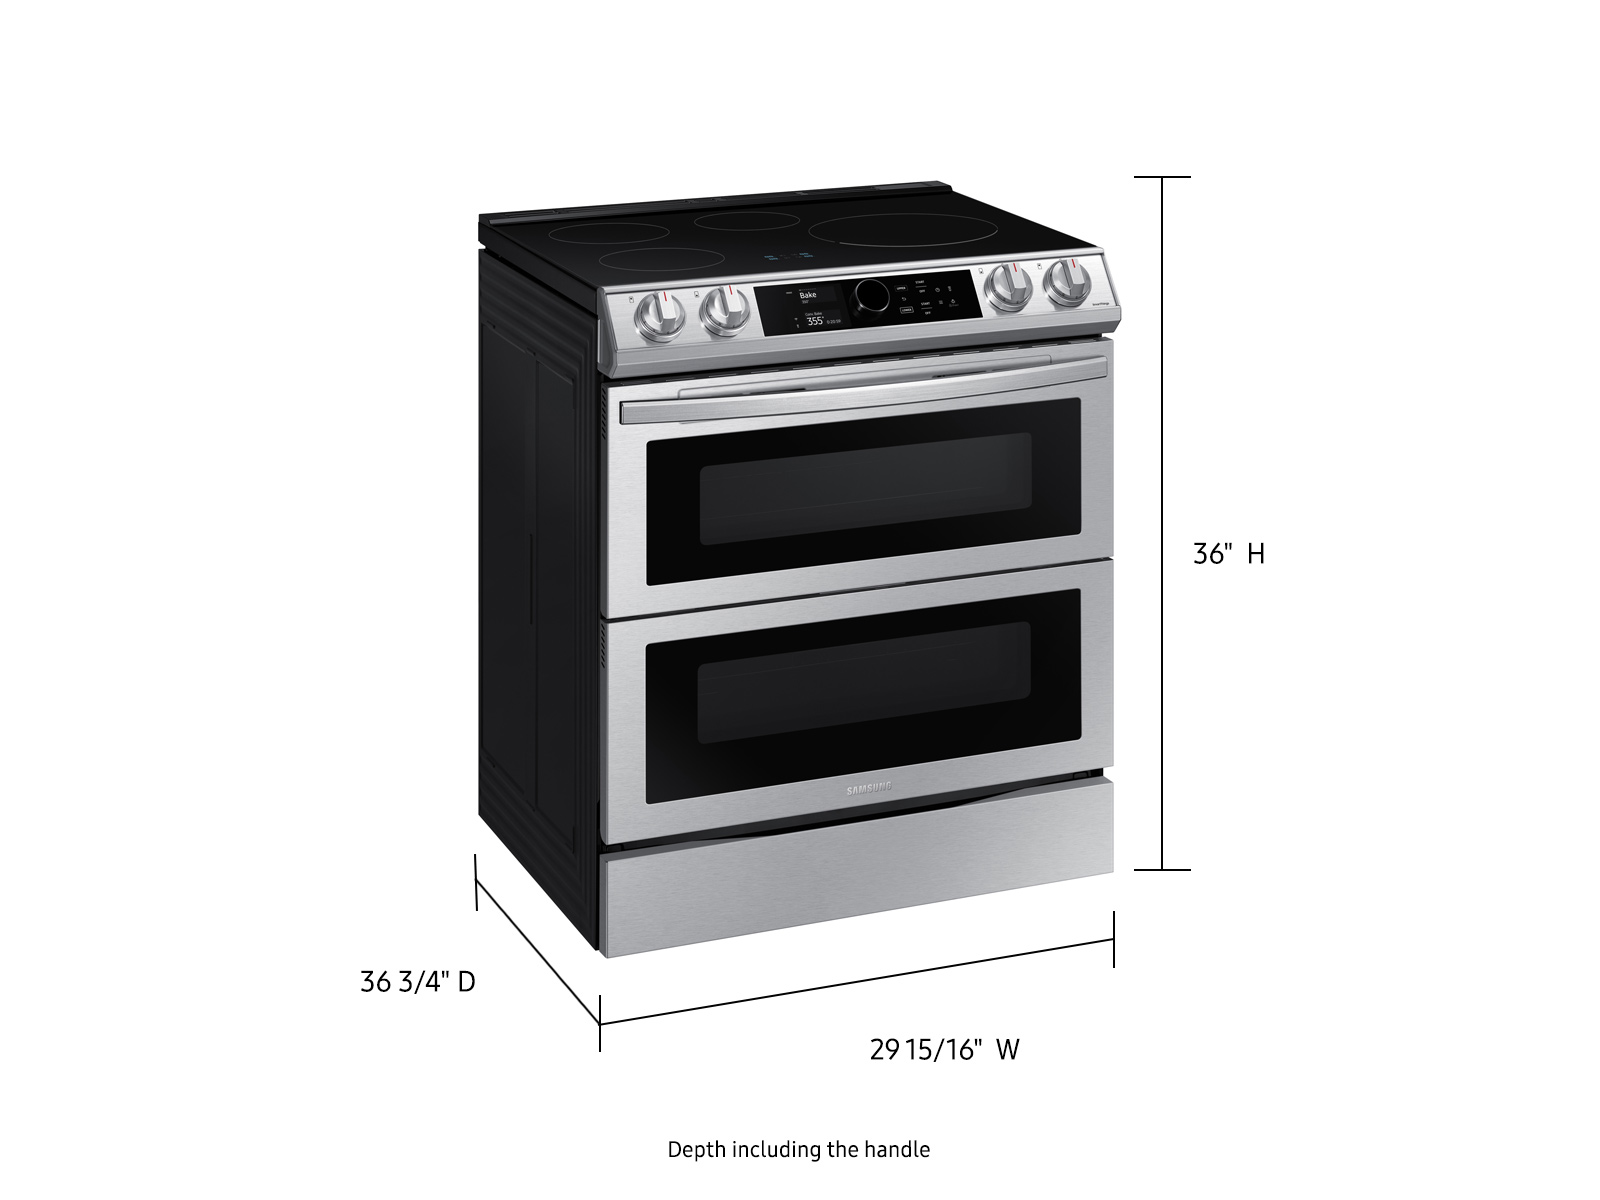 Samsung Slide-In Induction Range With Air Fry